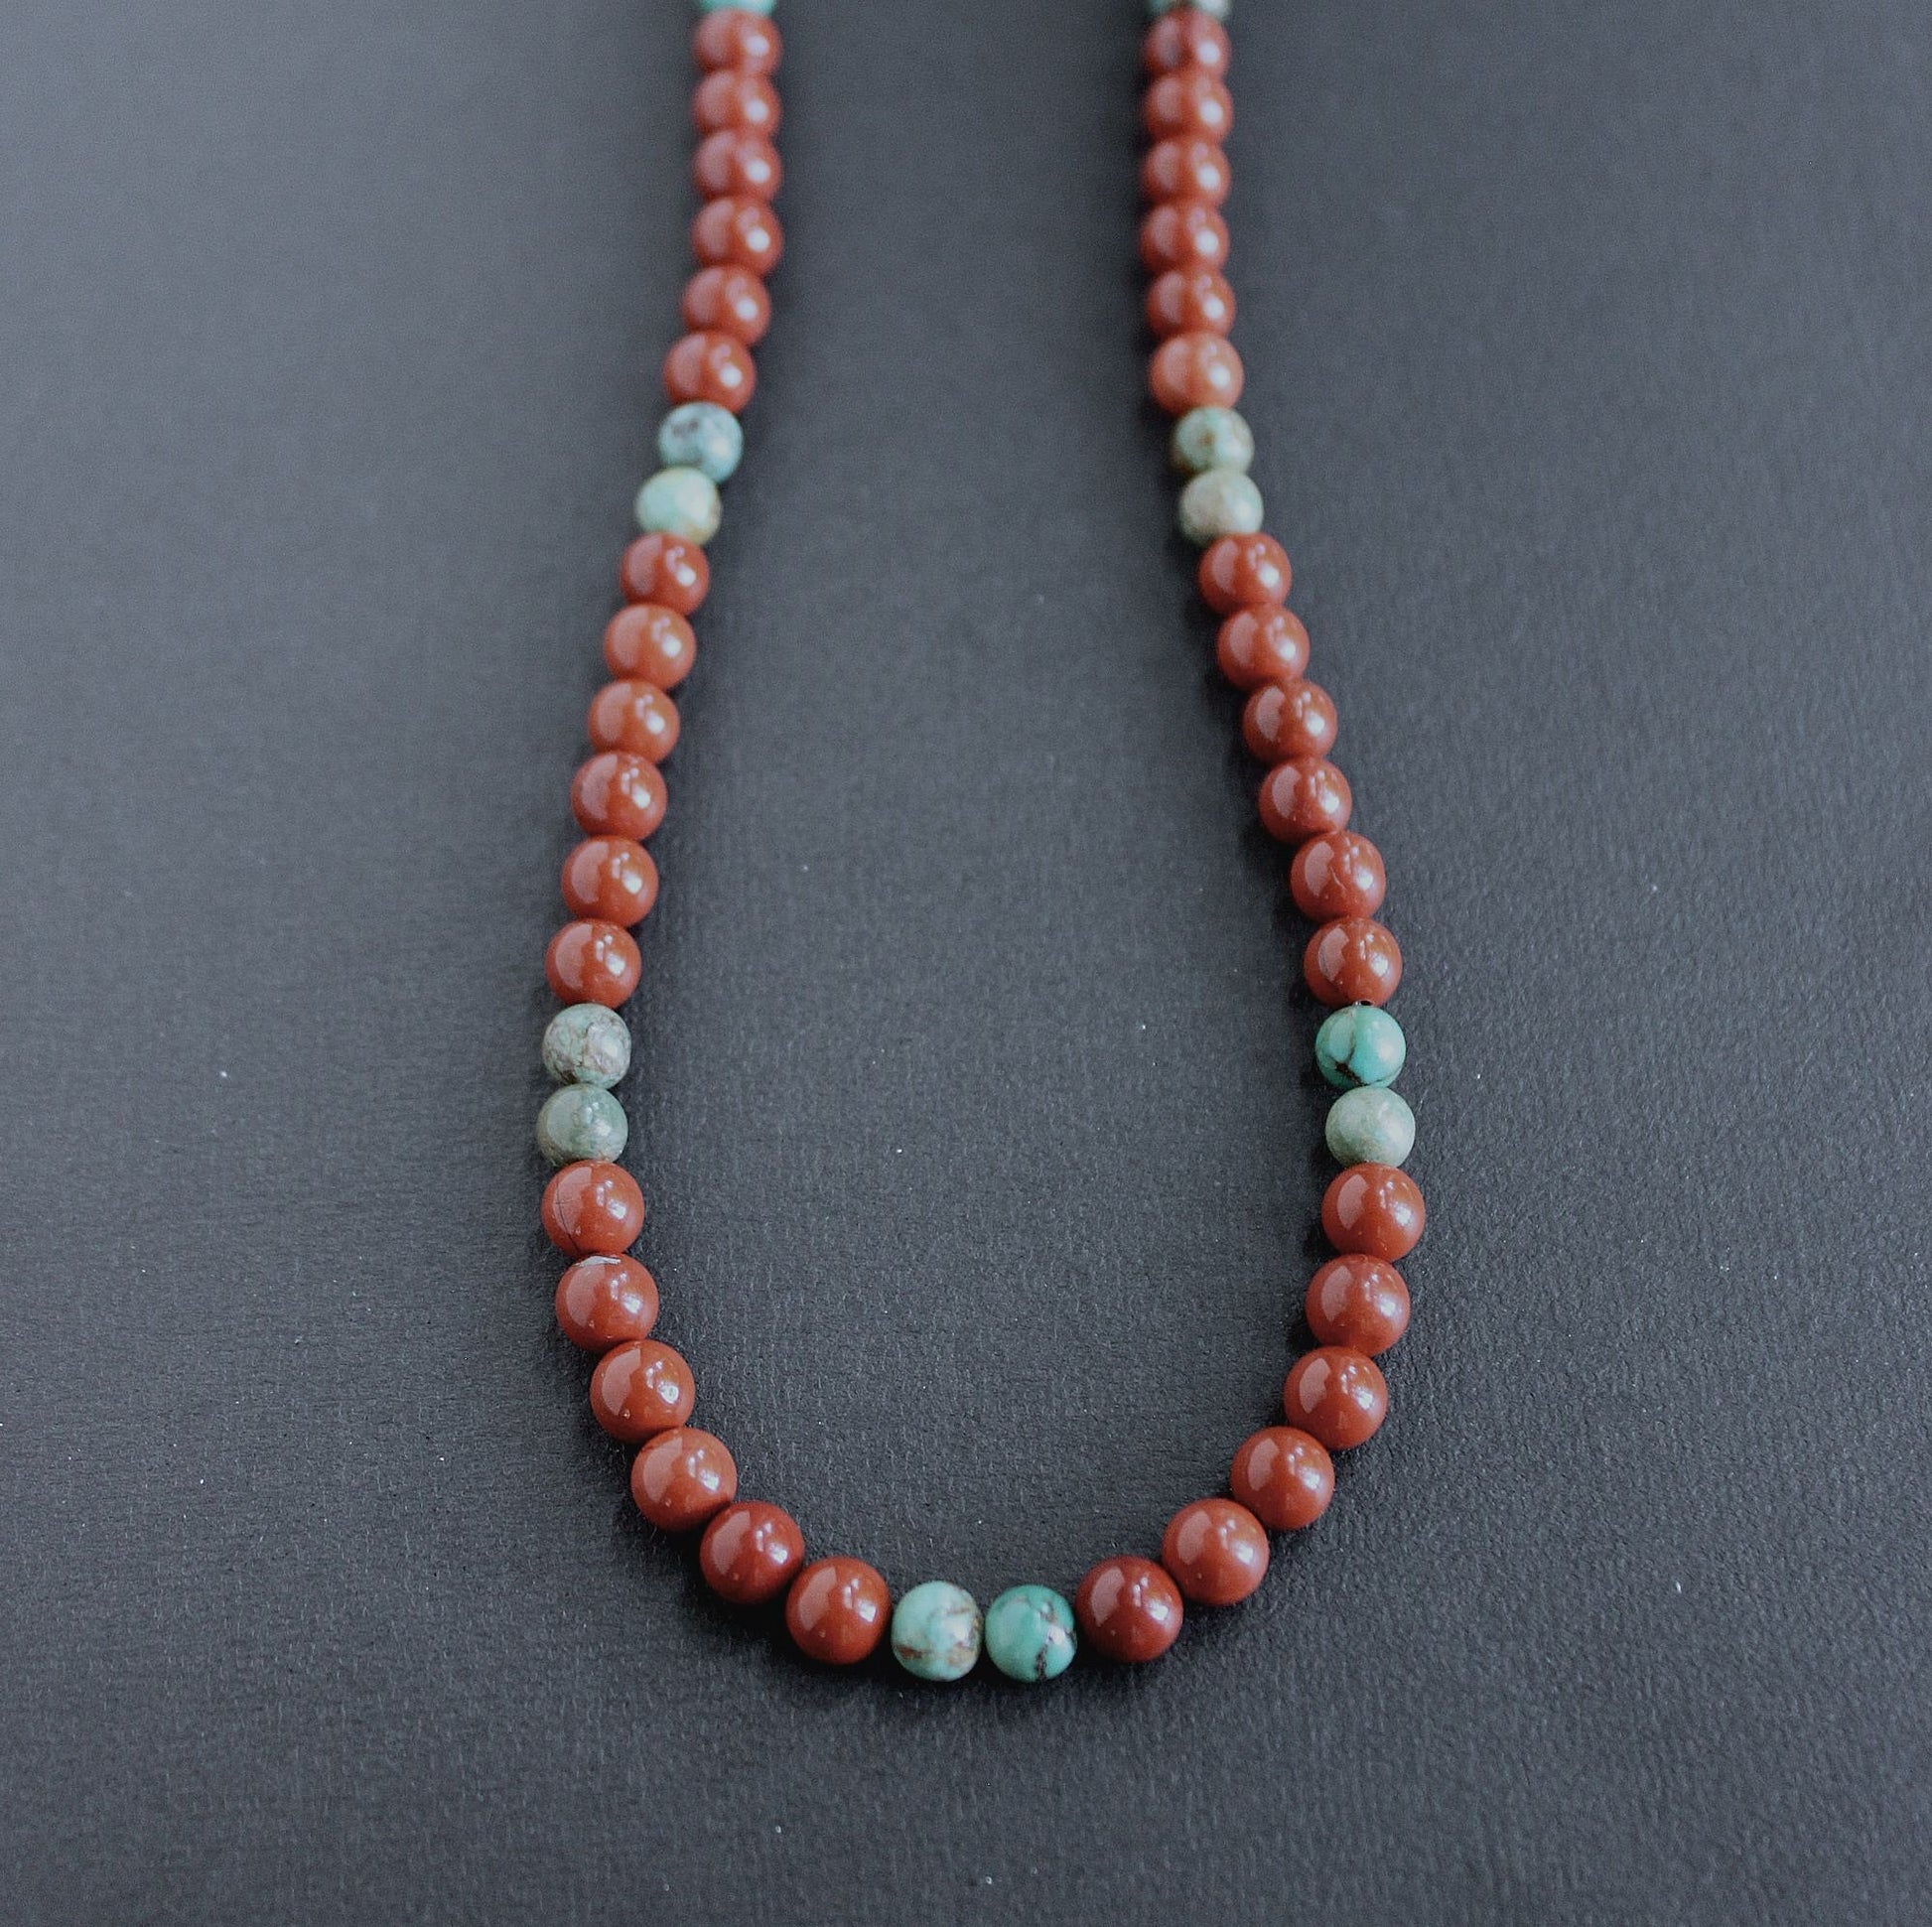 Men's 6mm Red Bead Necklace